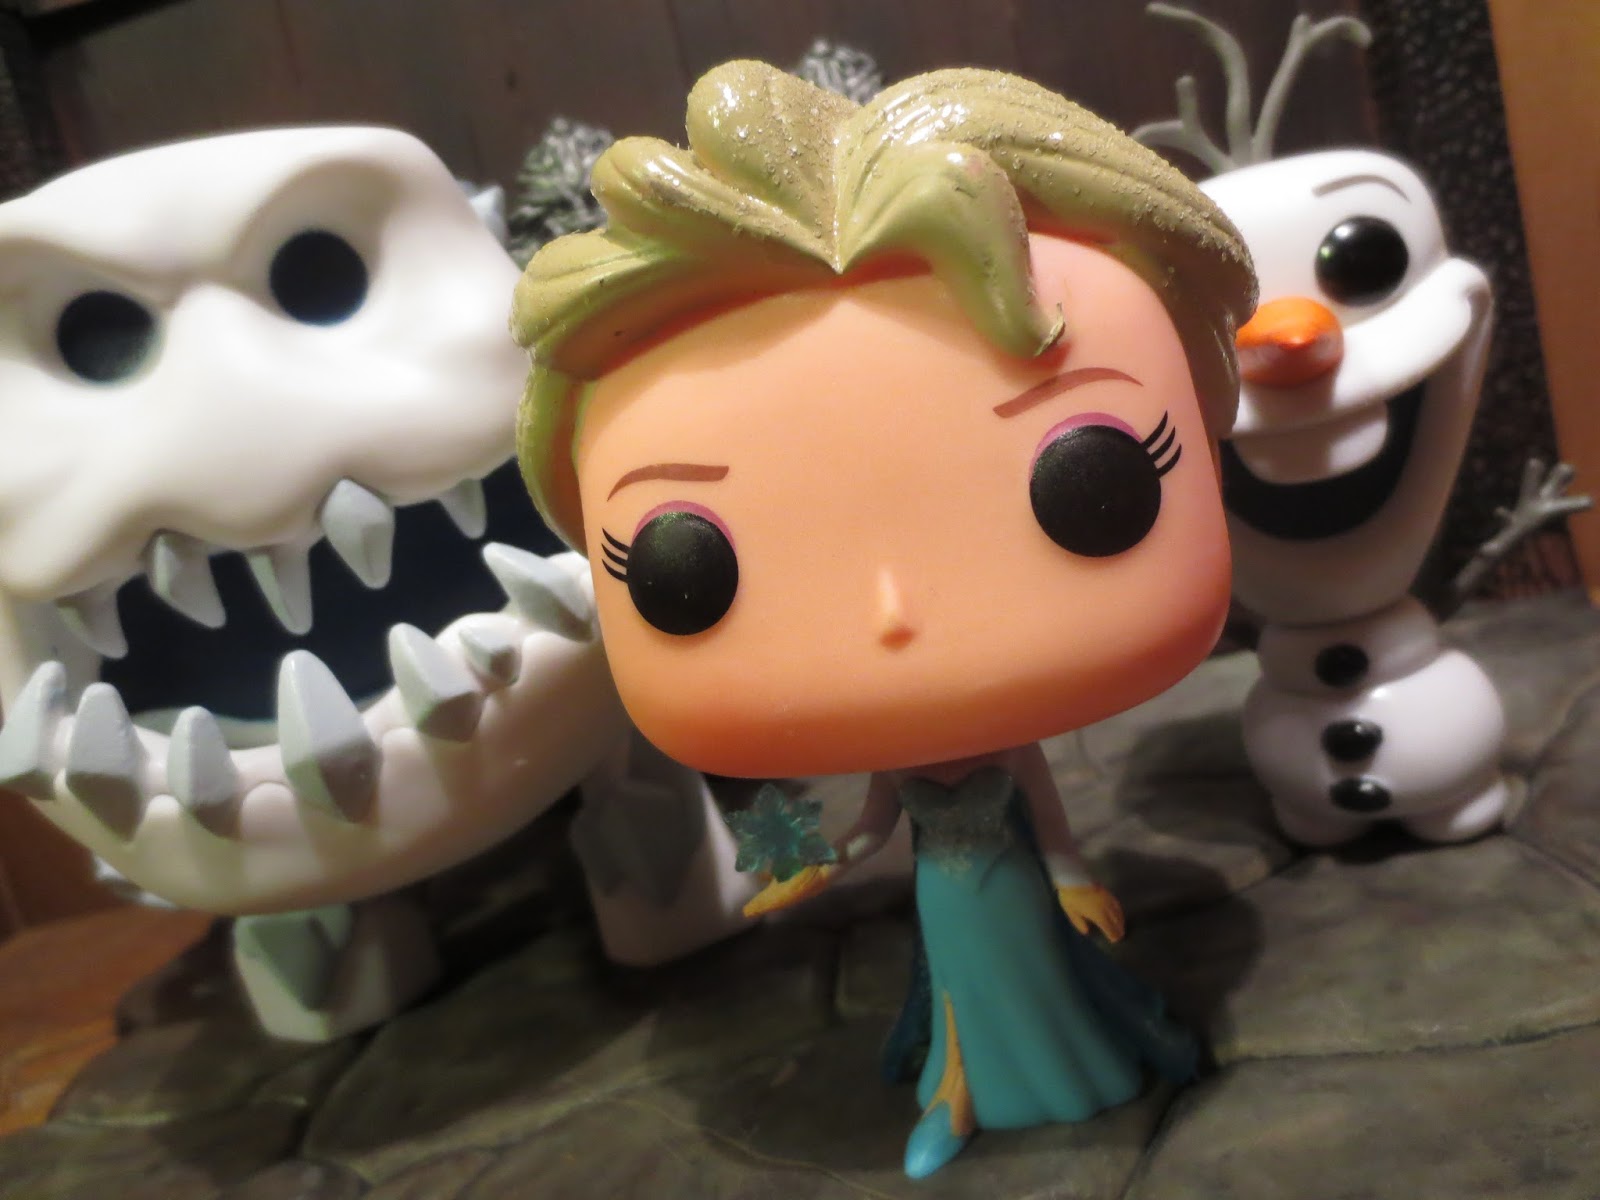 Grof Dodelijk paraplu Action Figure Barbecue: Action Figure Review: Elsa, Marshmallow, & Olaf  from Frozen from Pop! Disney by Funko